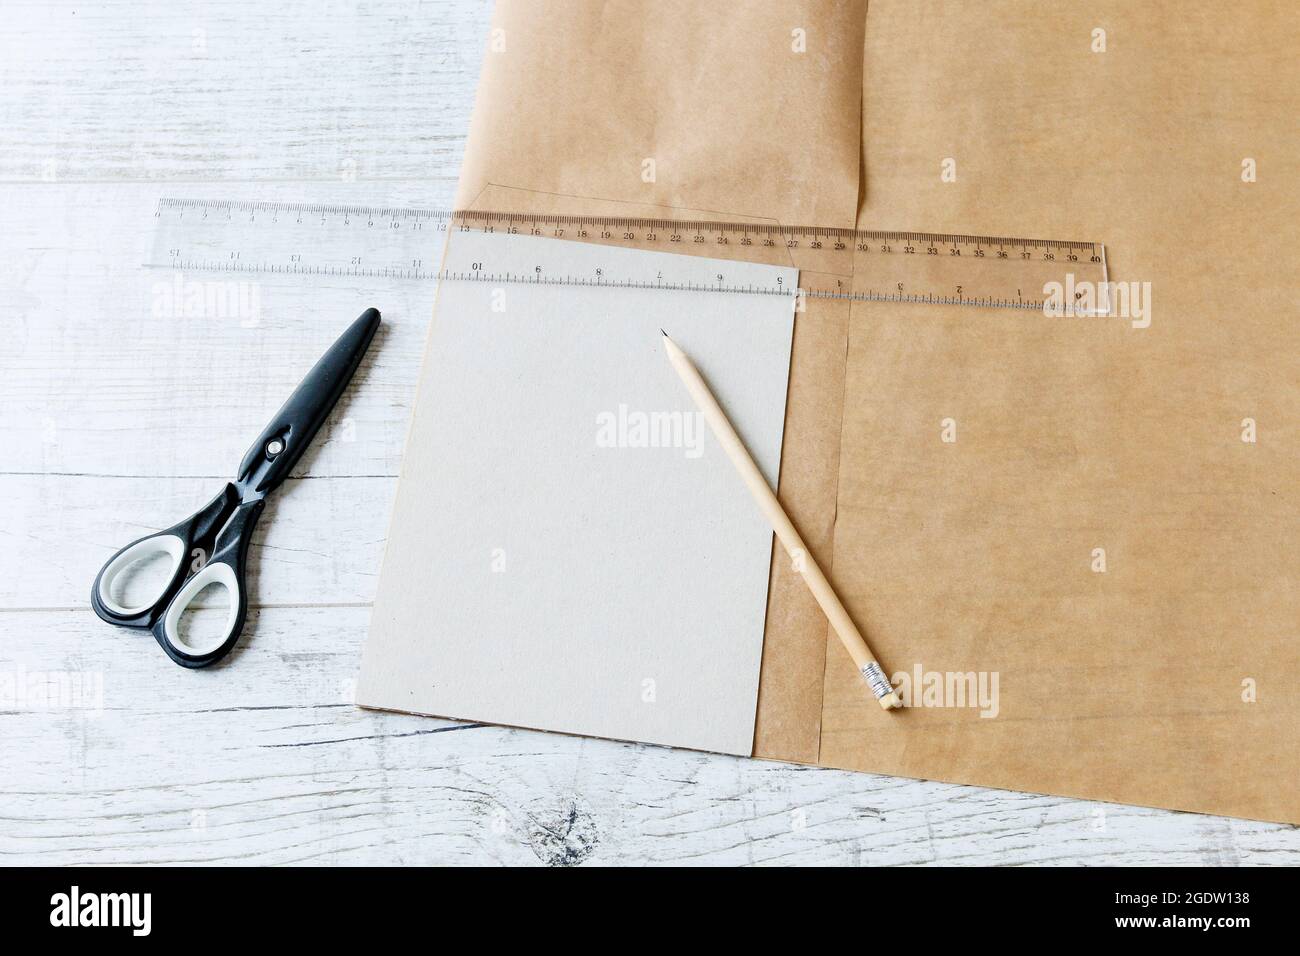 How to Make a Paper Bag: 13 Steps (with Pictures) - wikiHow